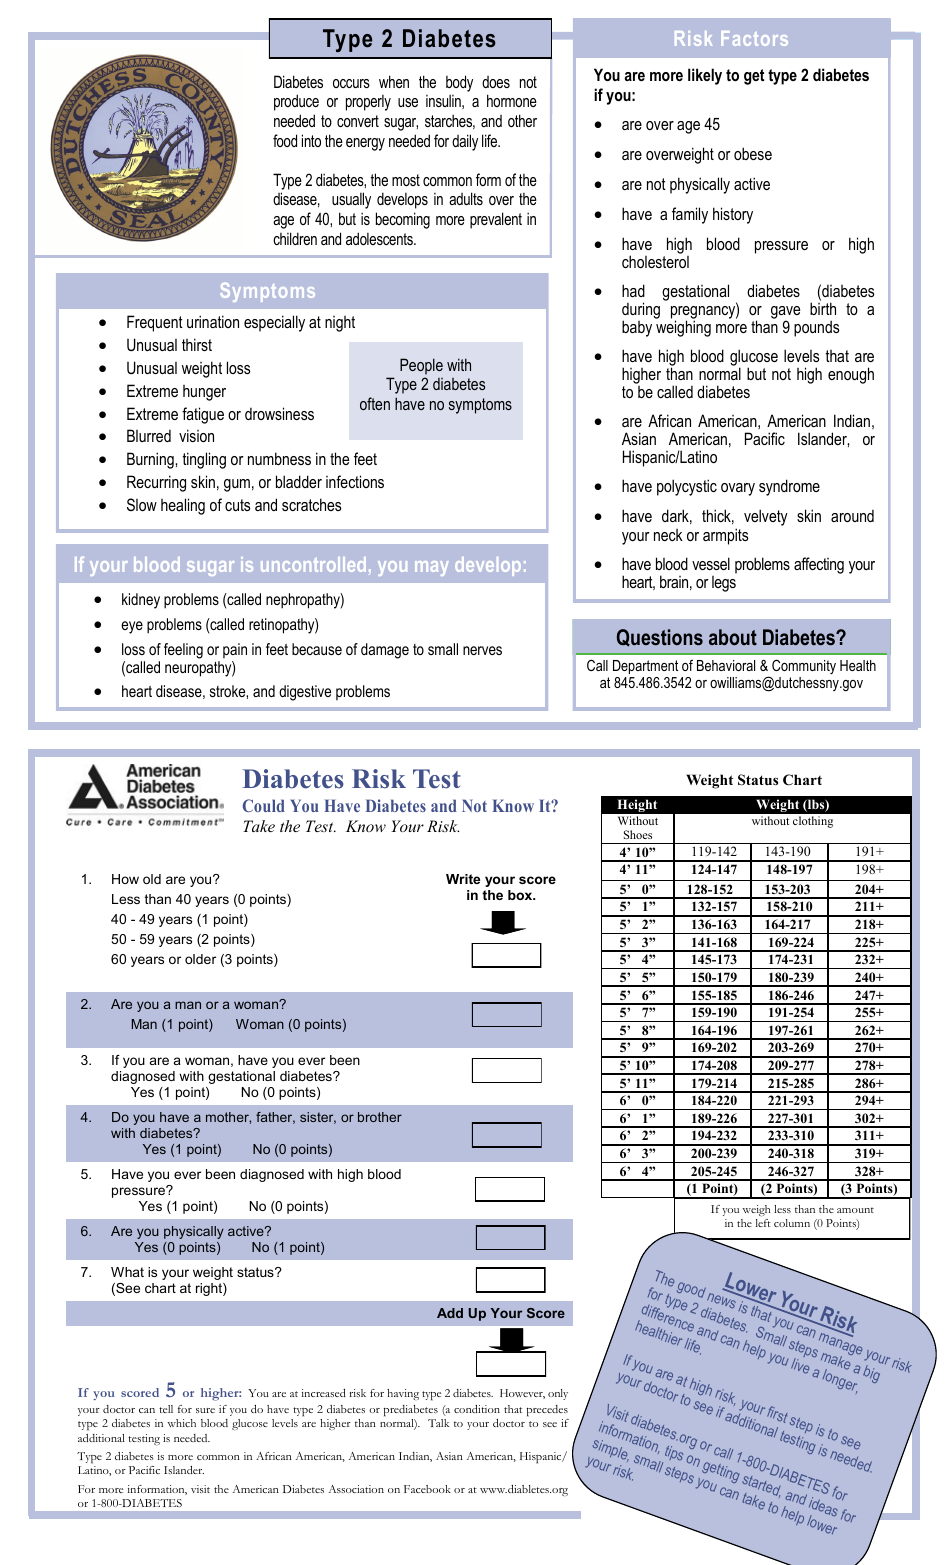 Type 2 Diabetes Risk Test Preview Image